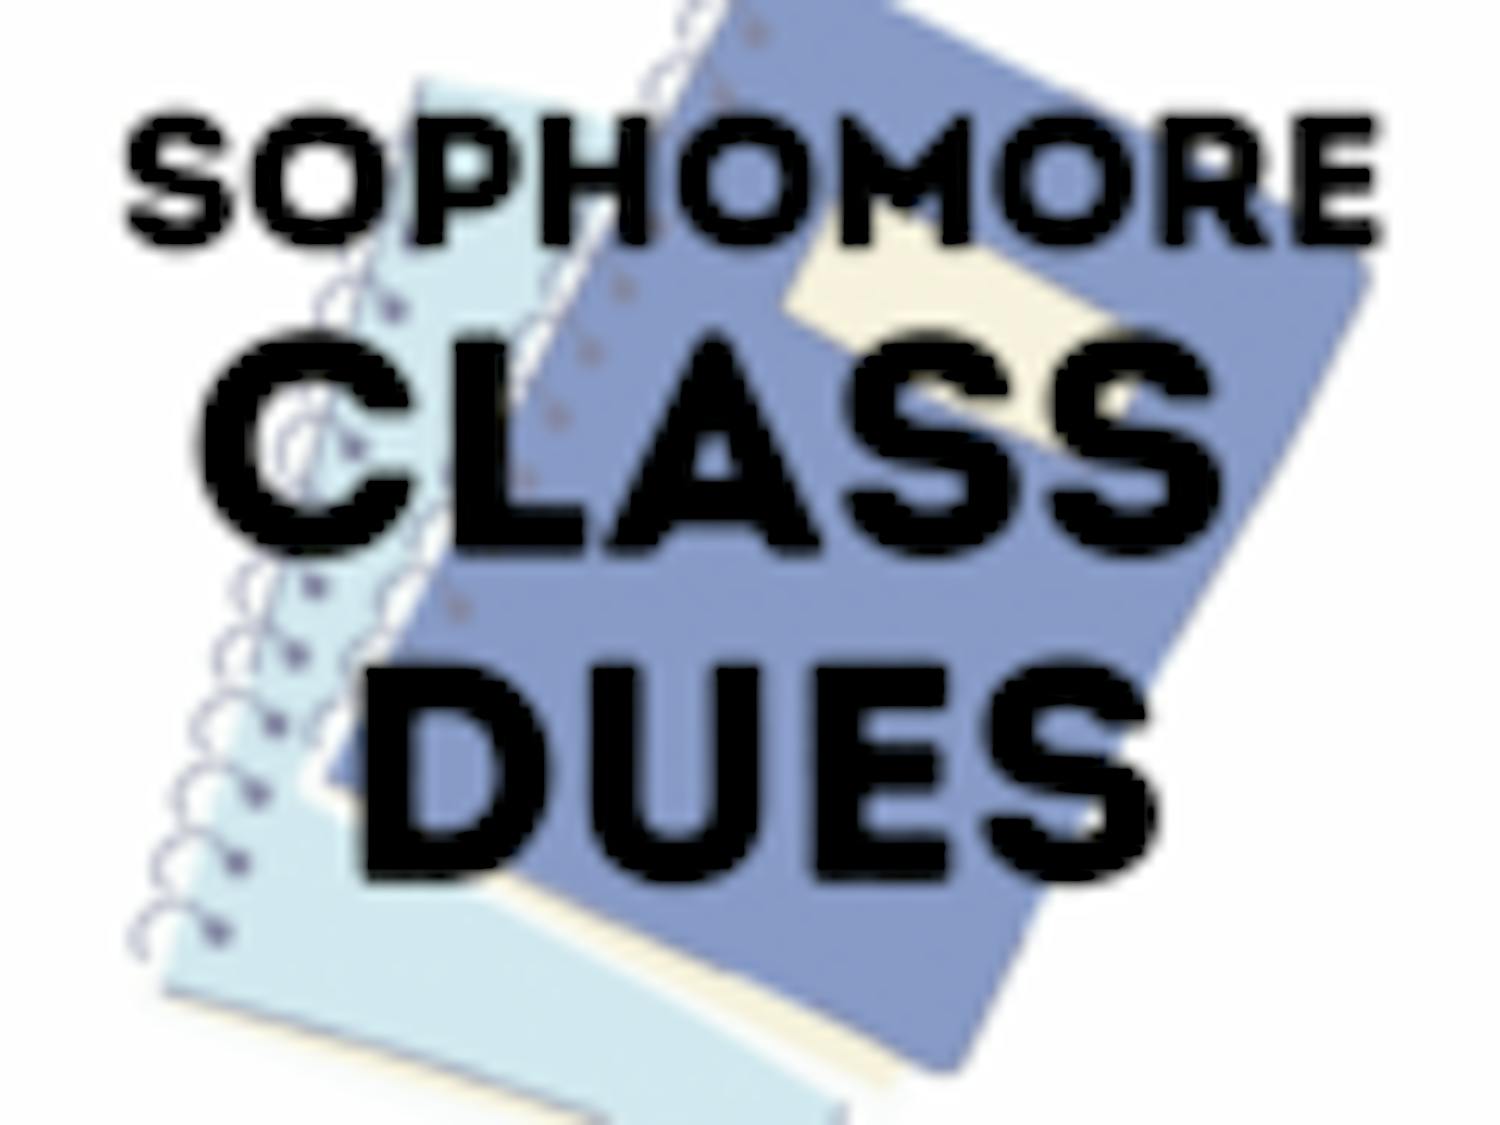 Sophomore Class Dues